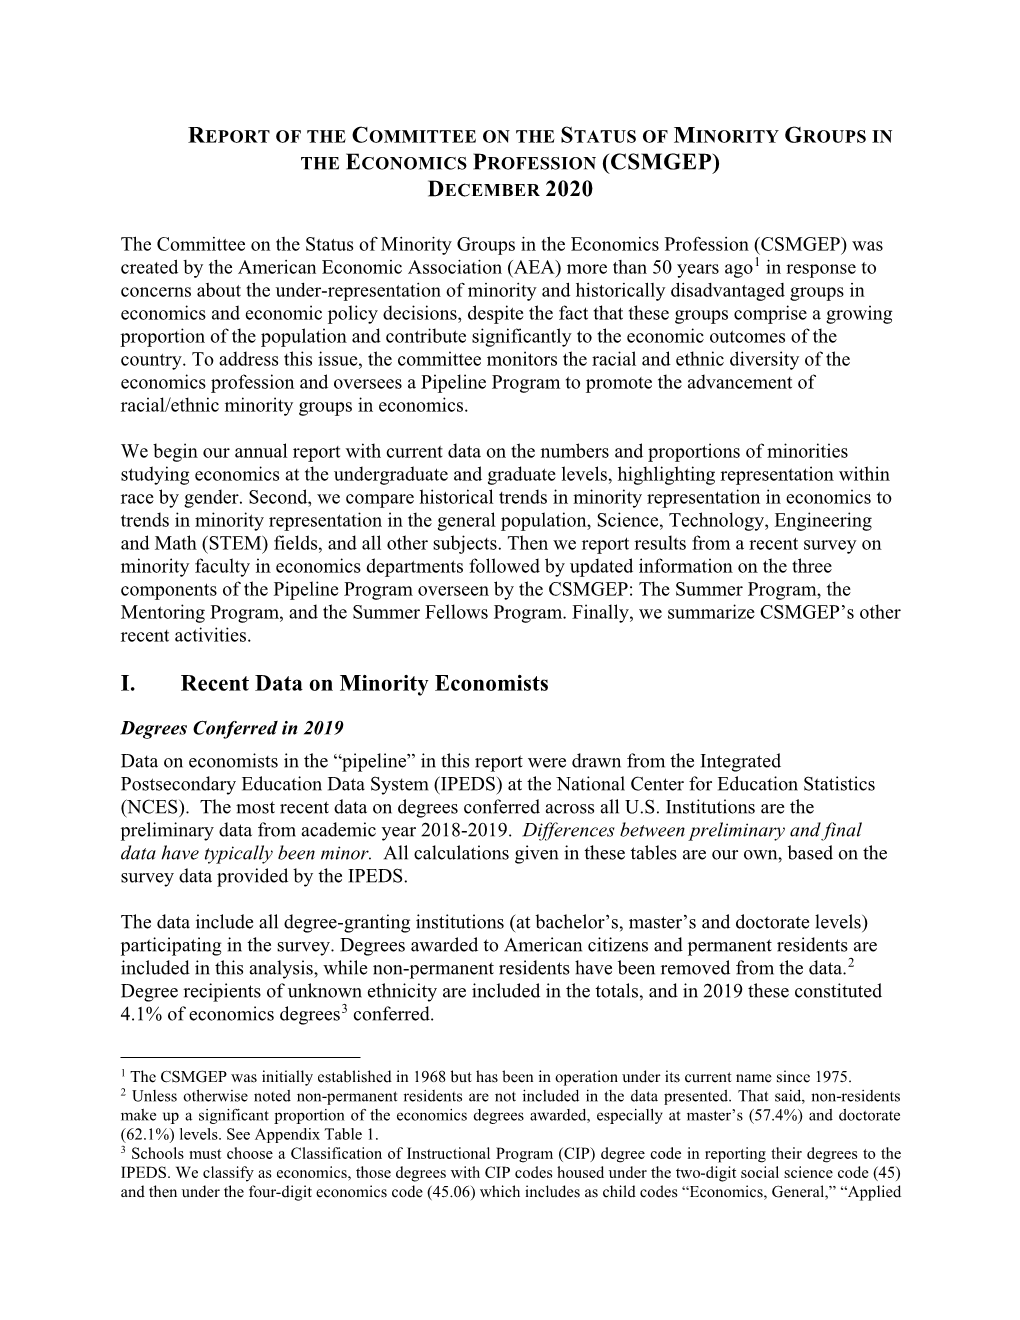 Report of the Committee on the Status of Minority Groups in the Economics Profession (Csmgep) December 2020